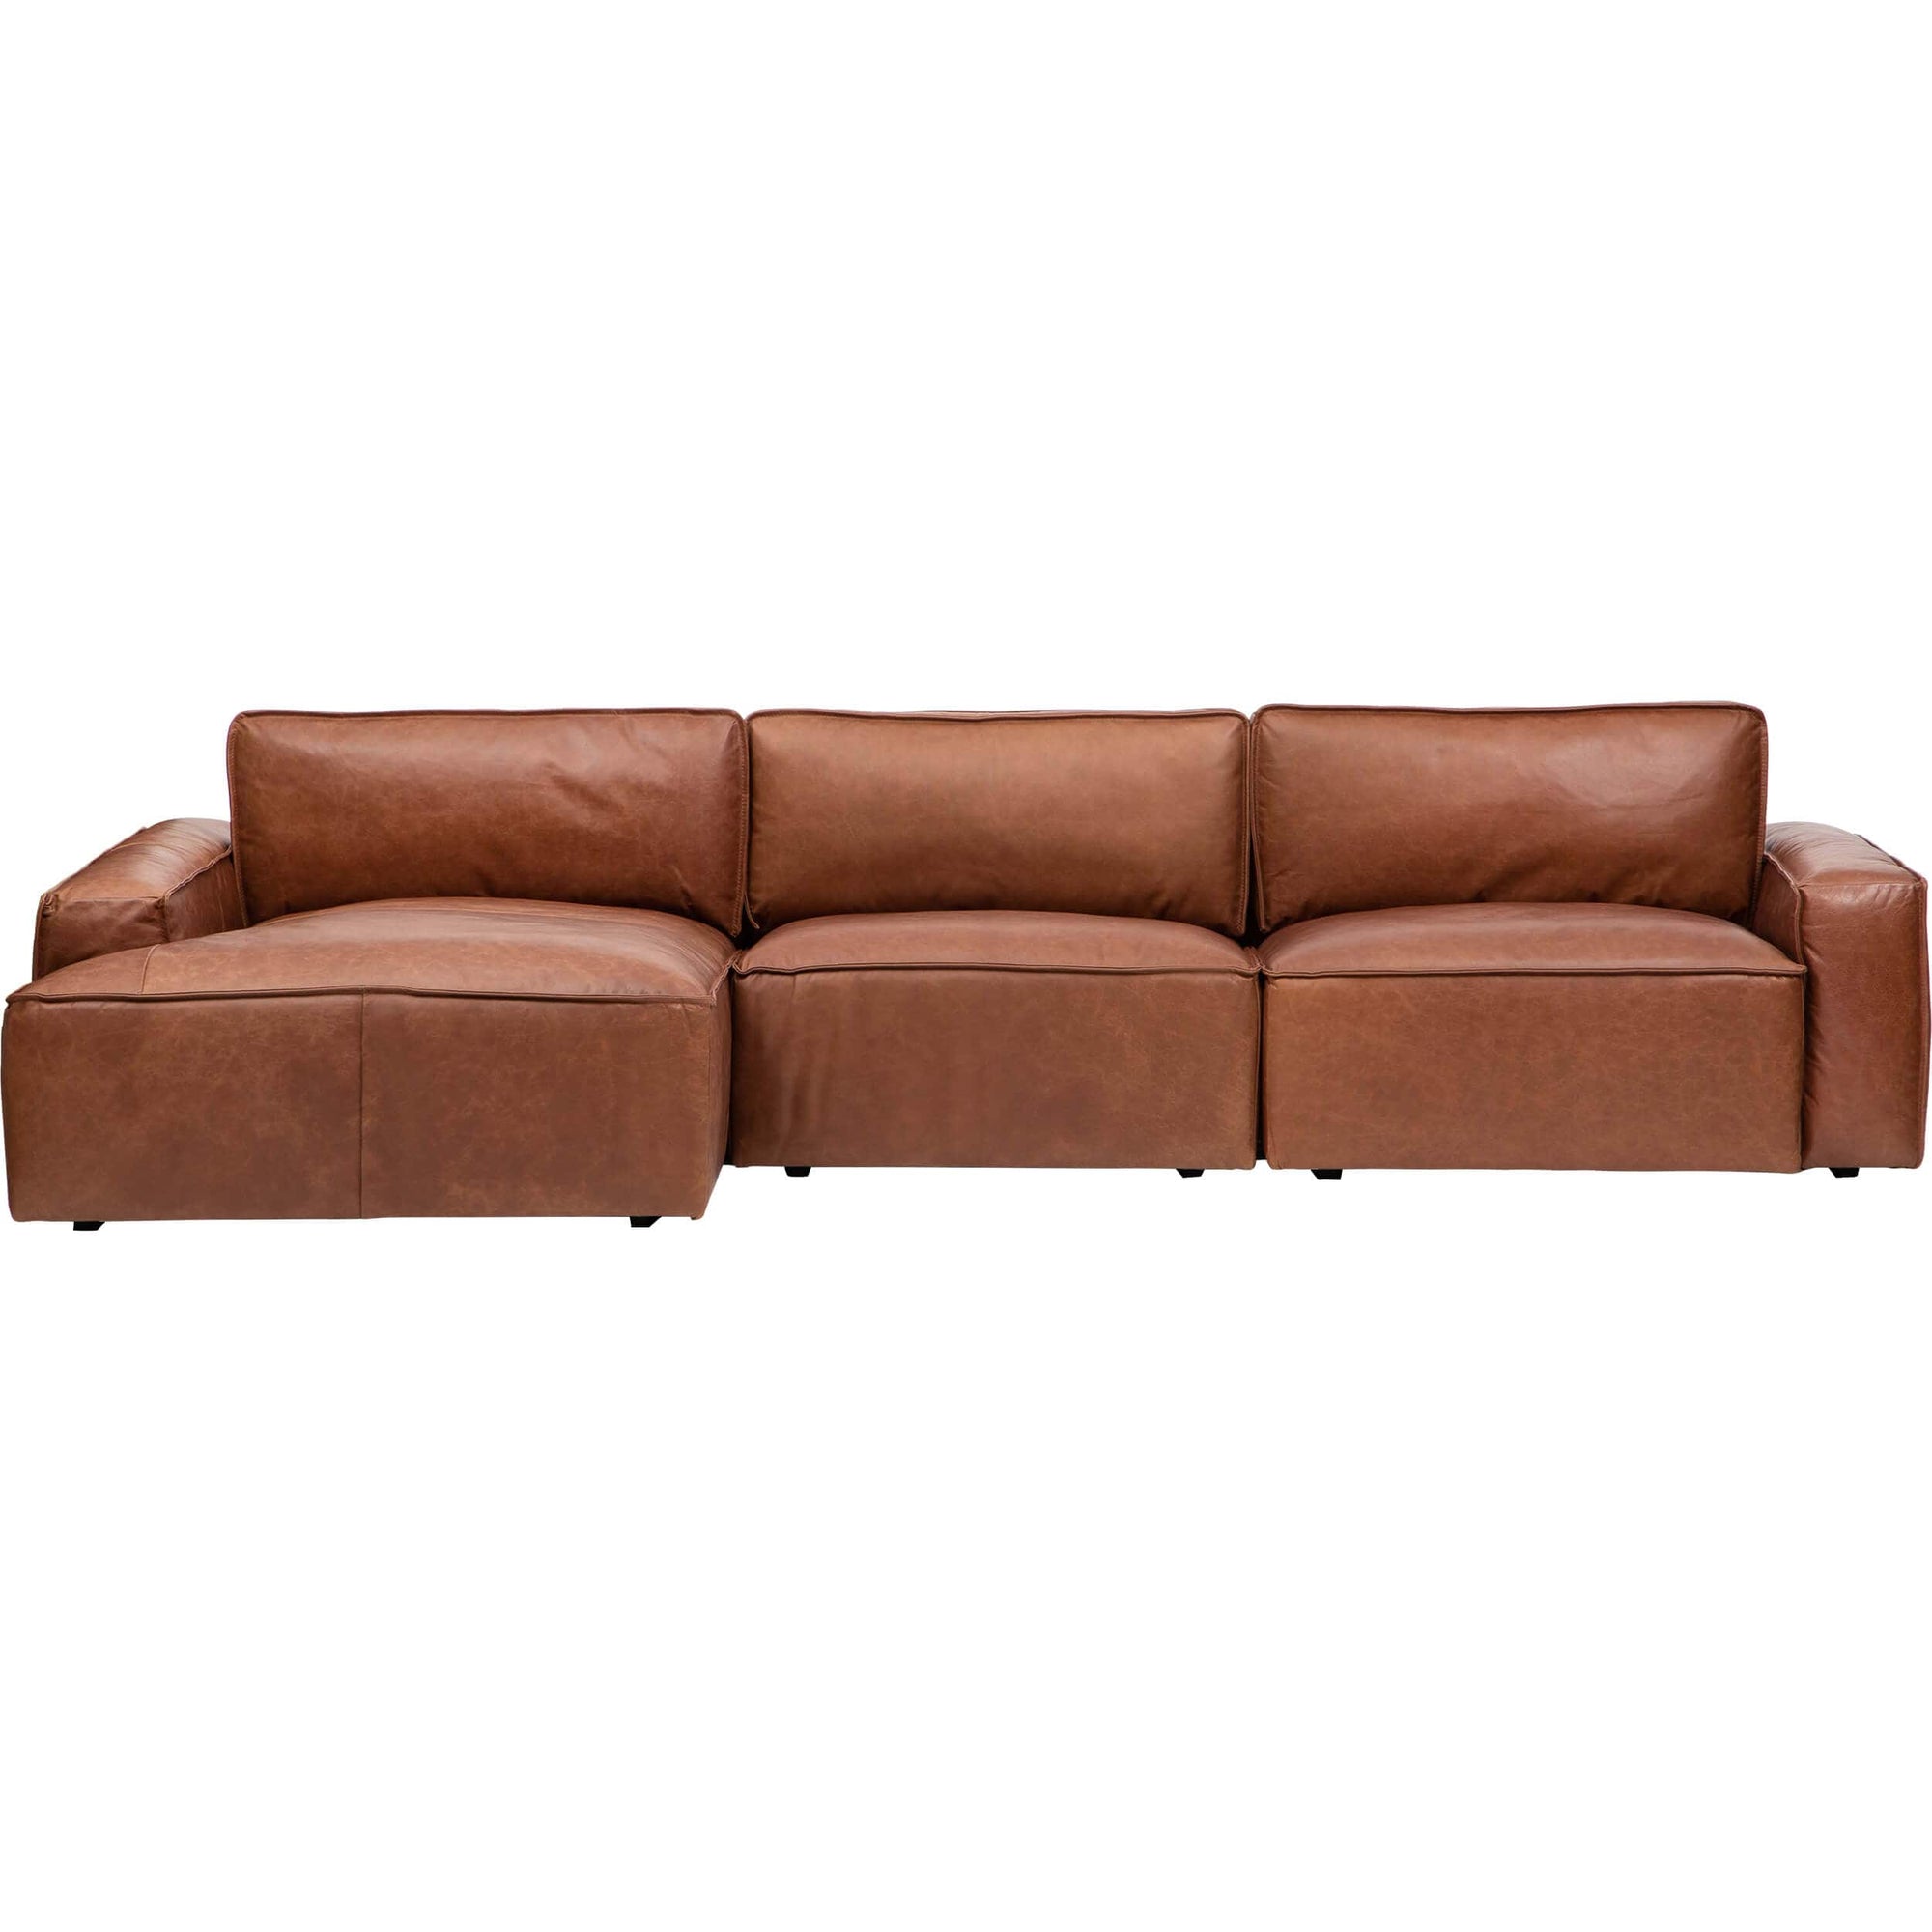 Zion Leather Sectional, Marseille Carmel – High Fashion Home